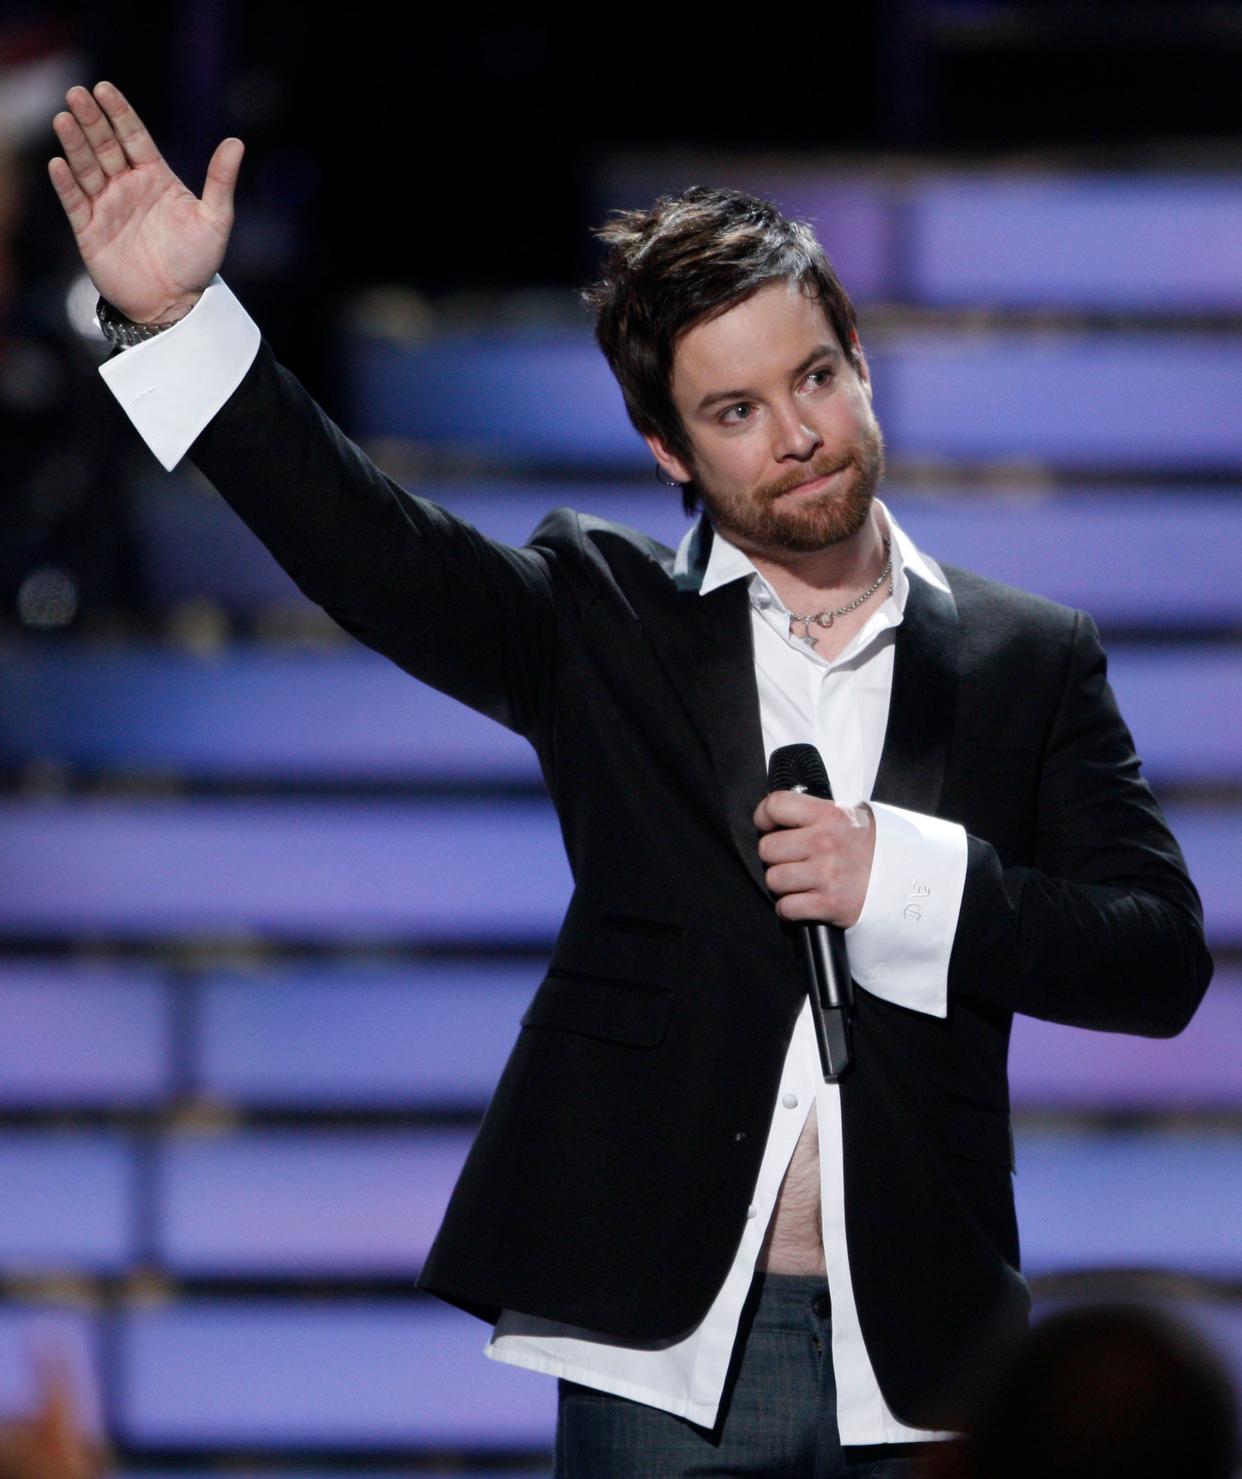 David Cook waves at the audience after being named the Season 7 winner in 2008.